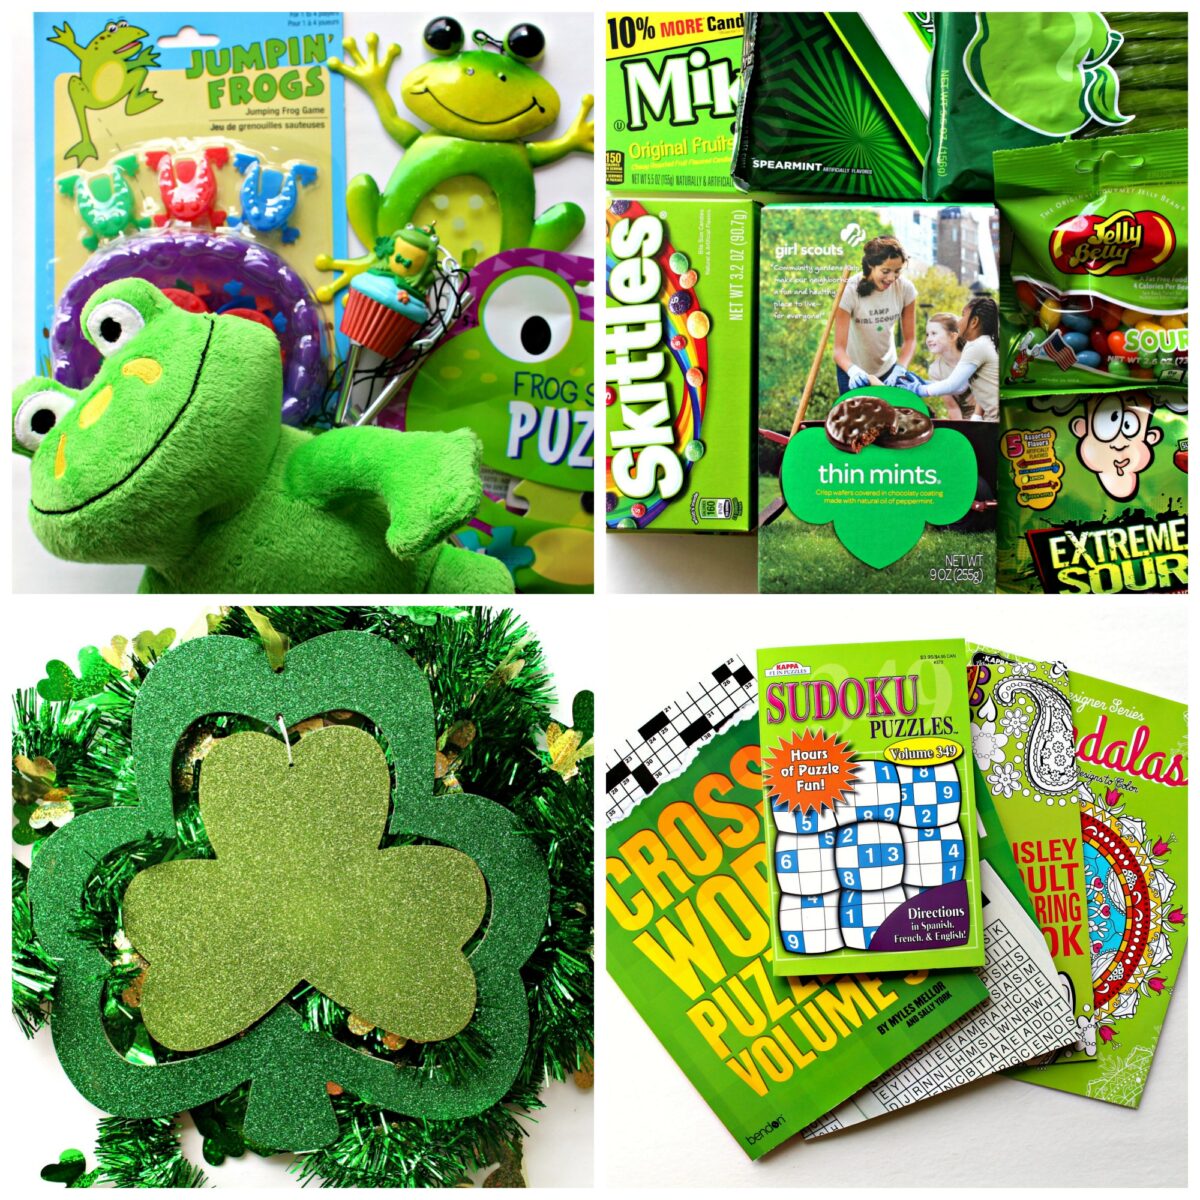 Contents of care package including frog toys, green packaged snacks, decorations, green puzzle books.